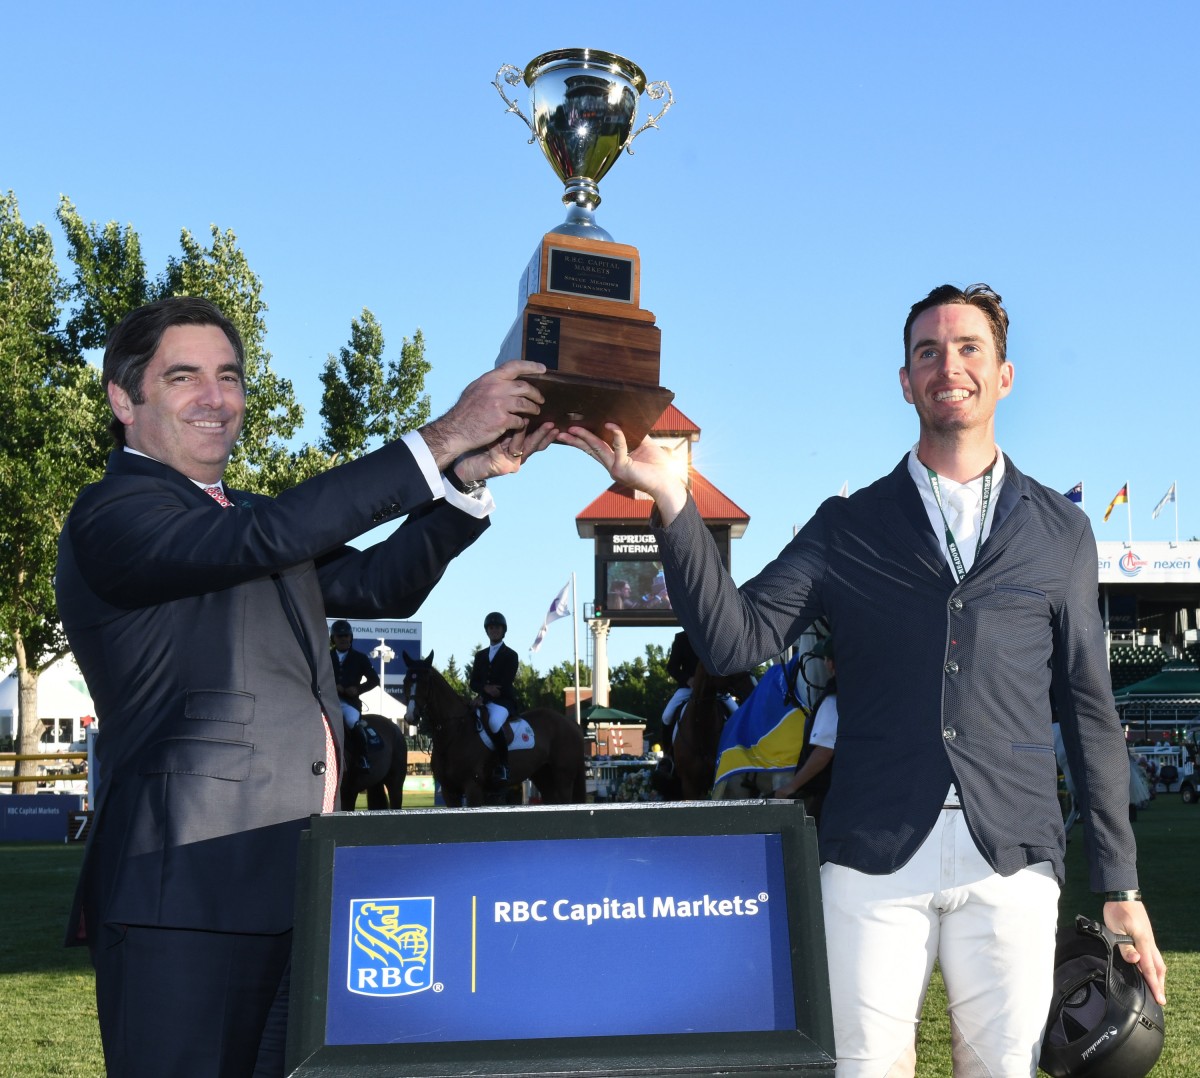 Chris Surbey Brings Home the RBC Capital Markets Cup